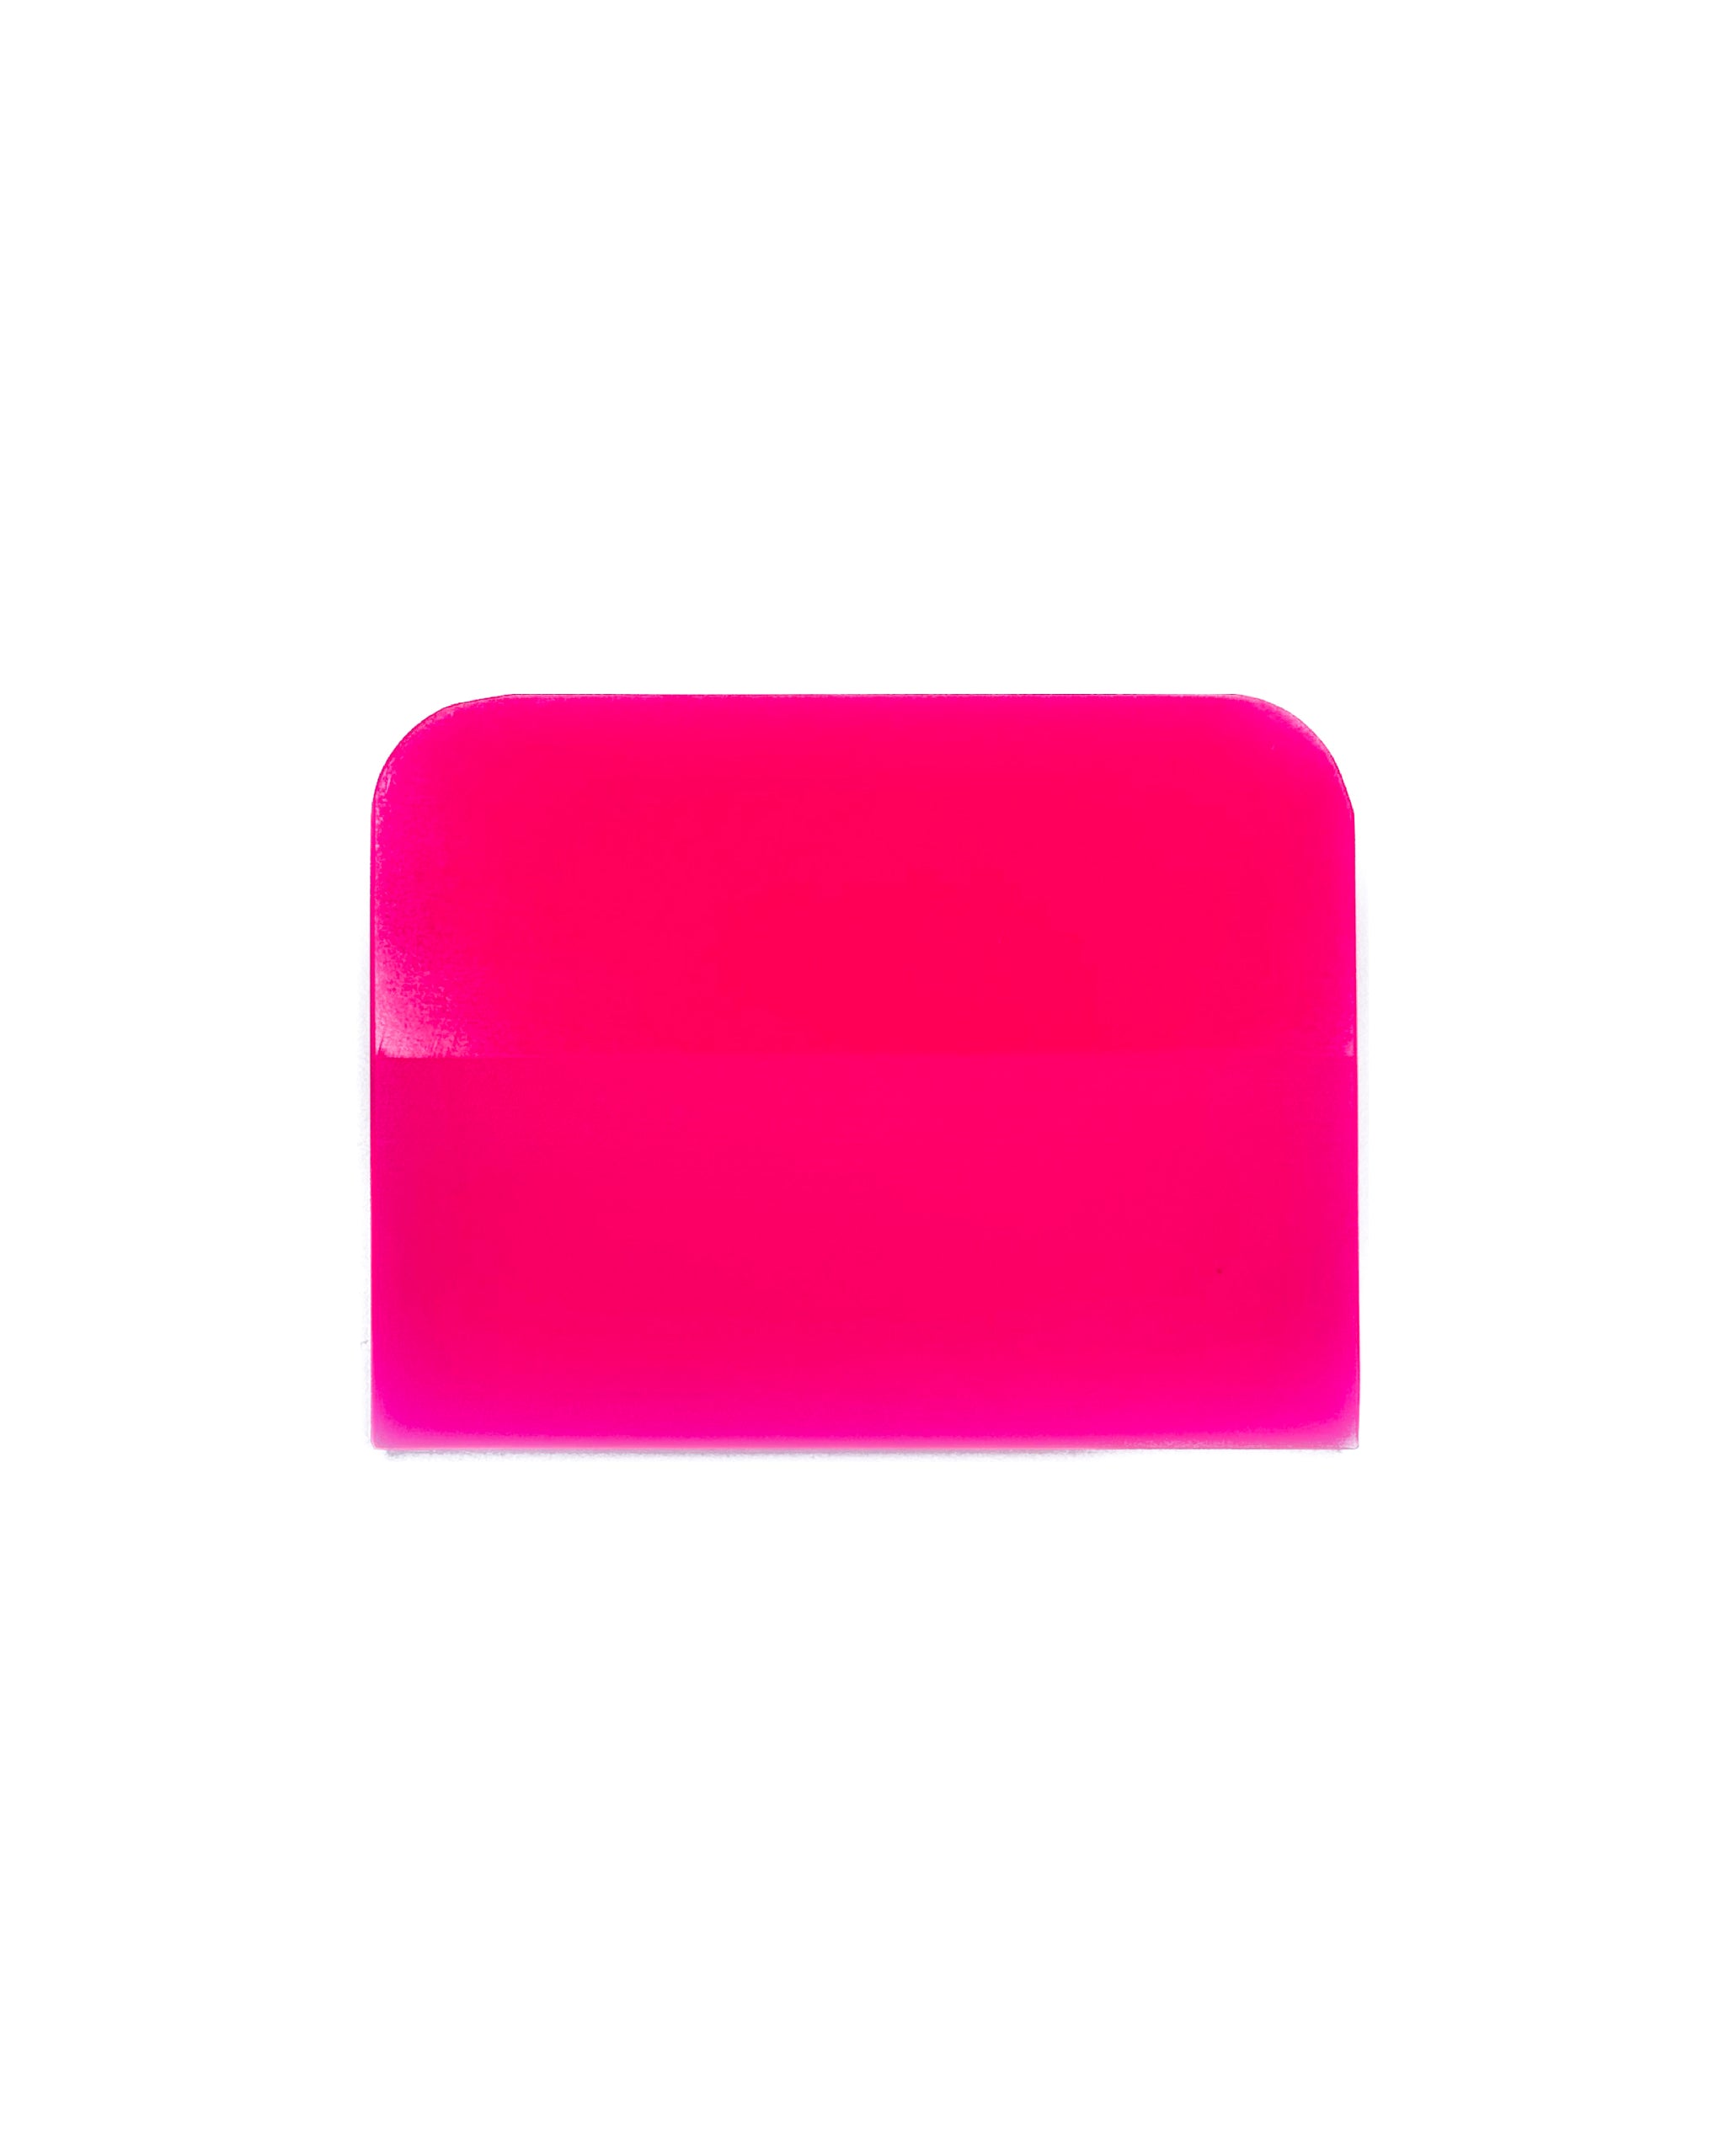 Pink Curved PPF Squeegee - Medium Hardness